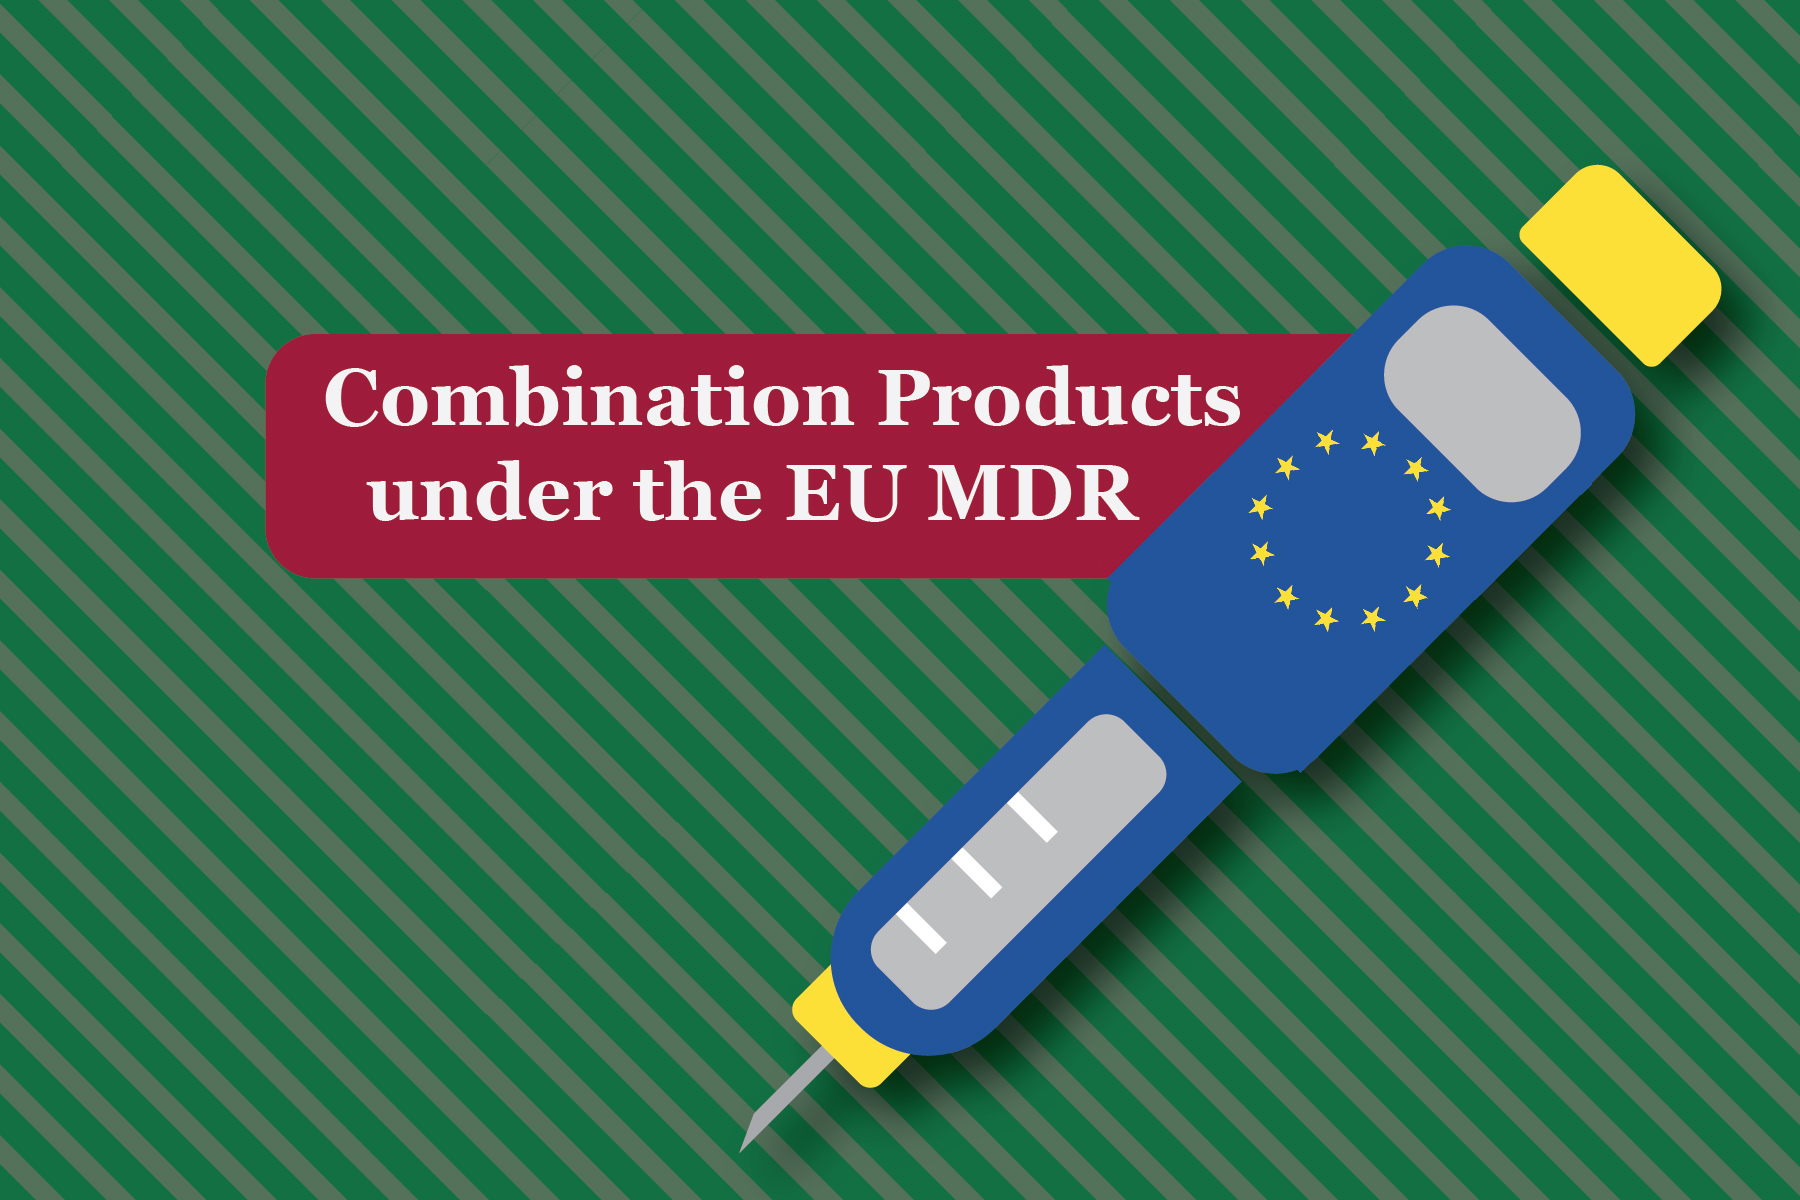 Combination Products under the EU MDR